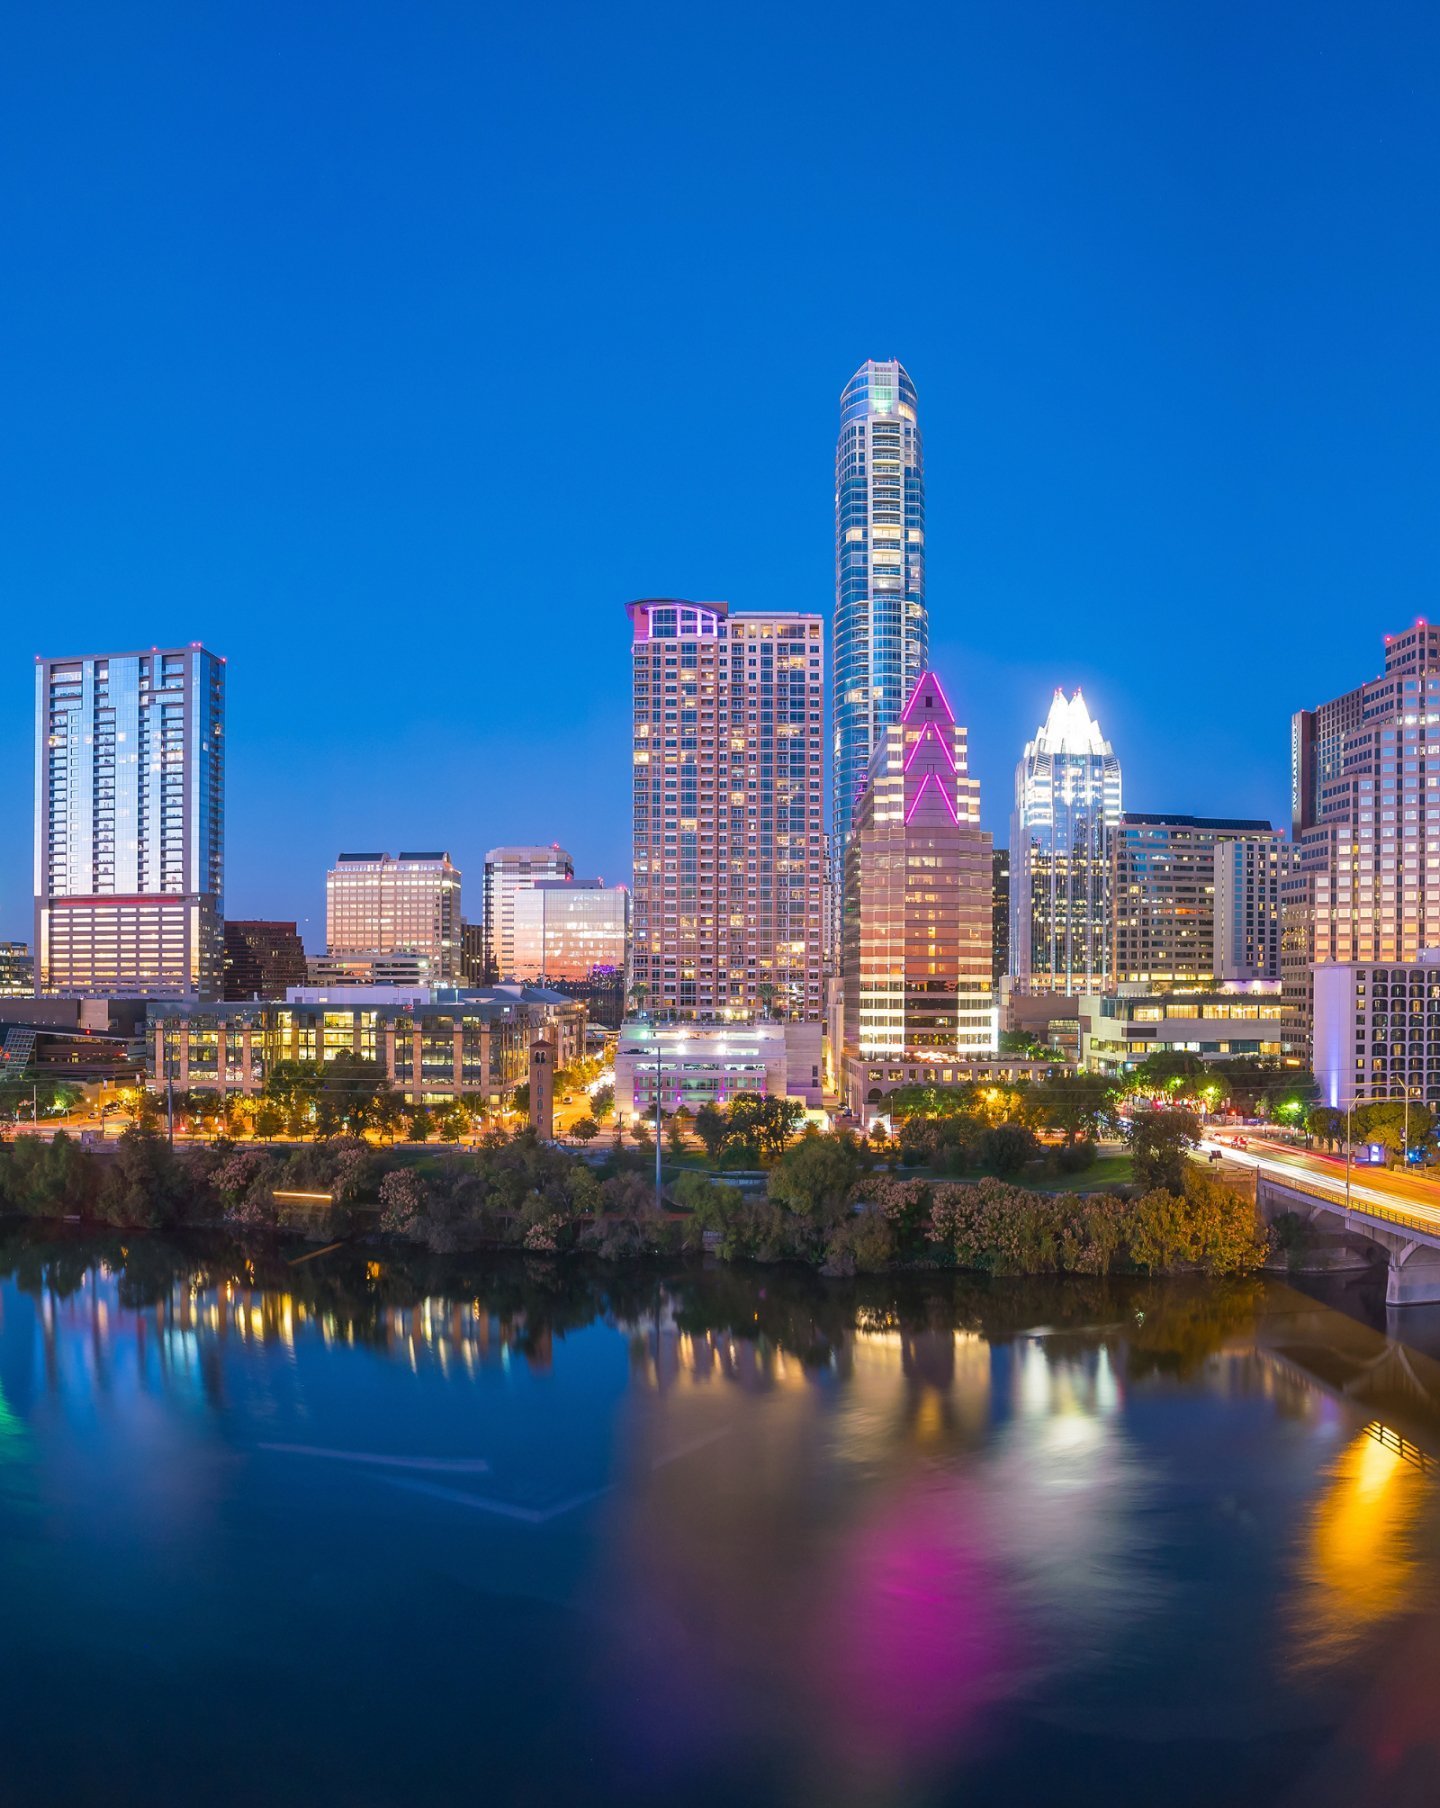 Downtown skyline of Austin, TX from across the Texas Colorado River